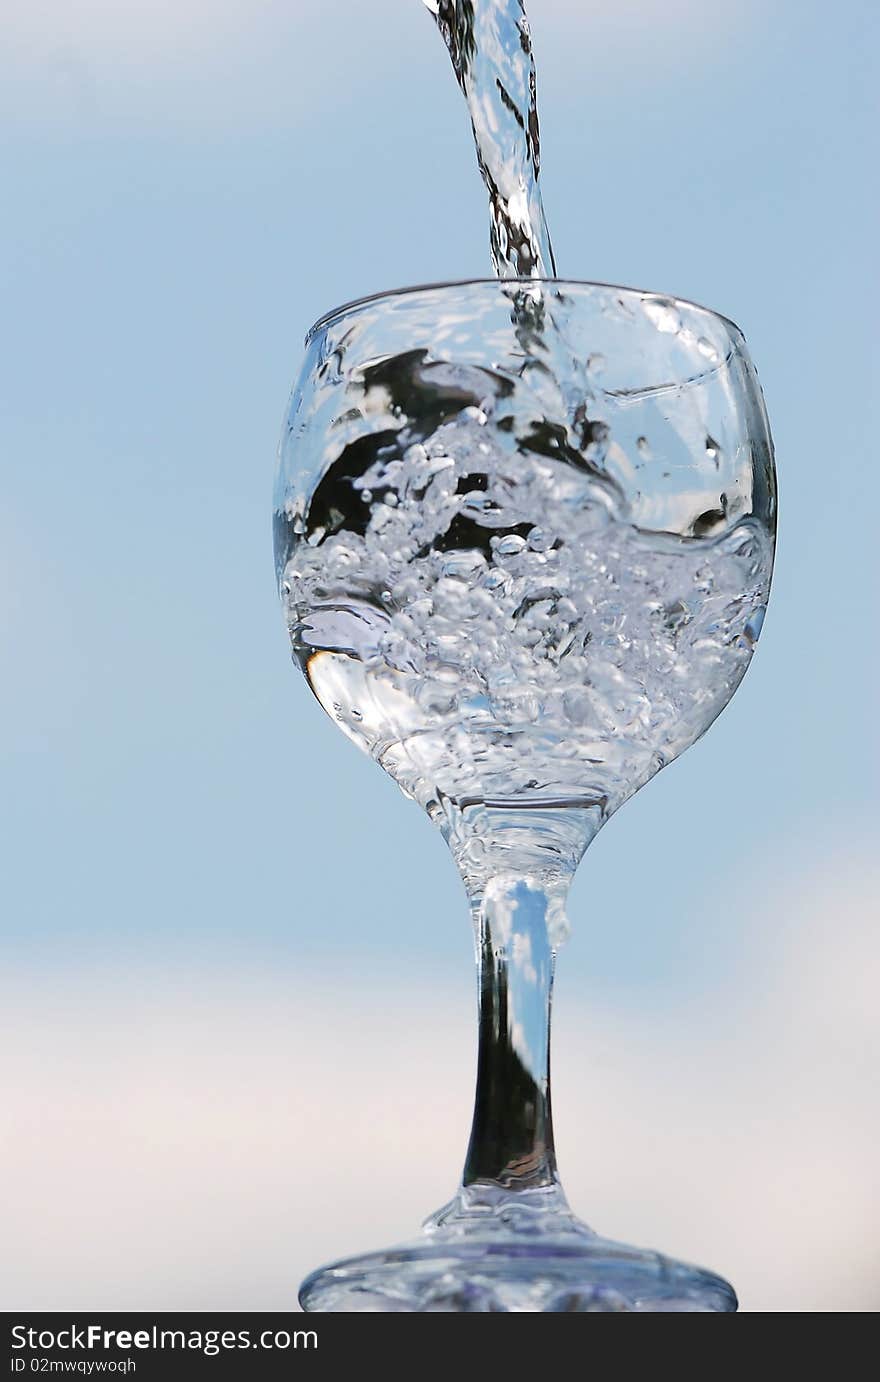 Glass in which flows pure water from a bottle. Glass in which flows pure water from a bottle